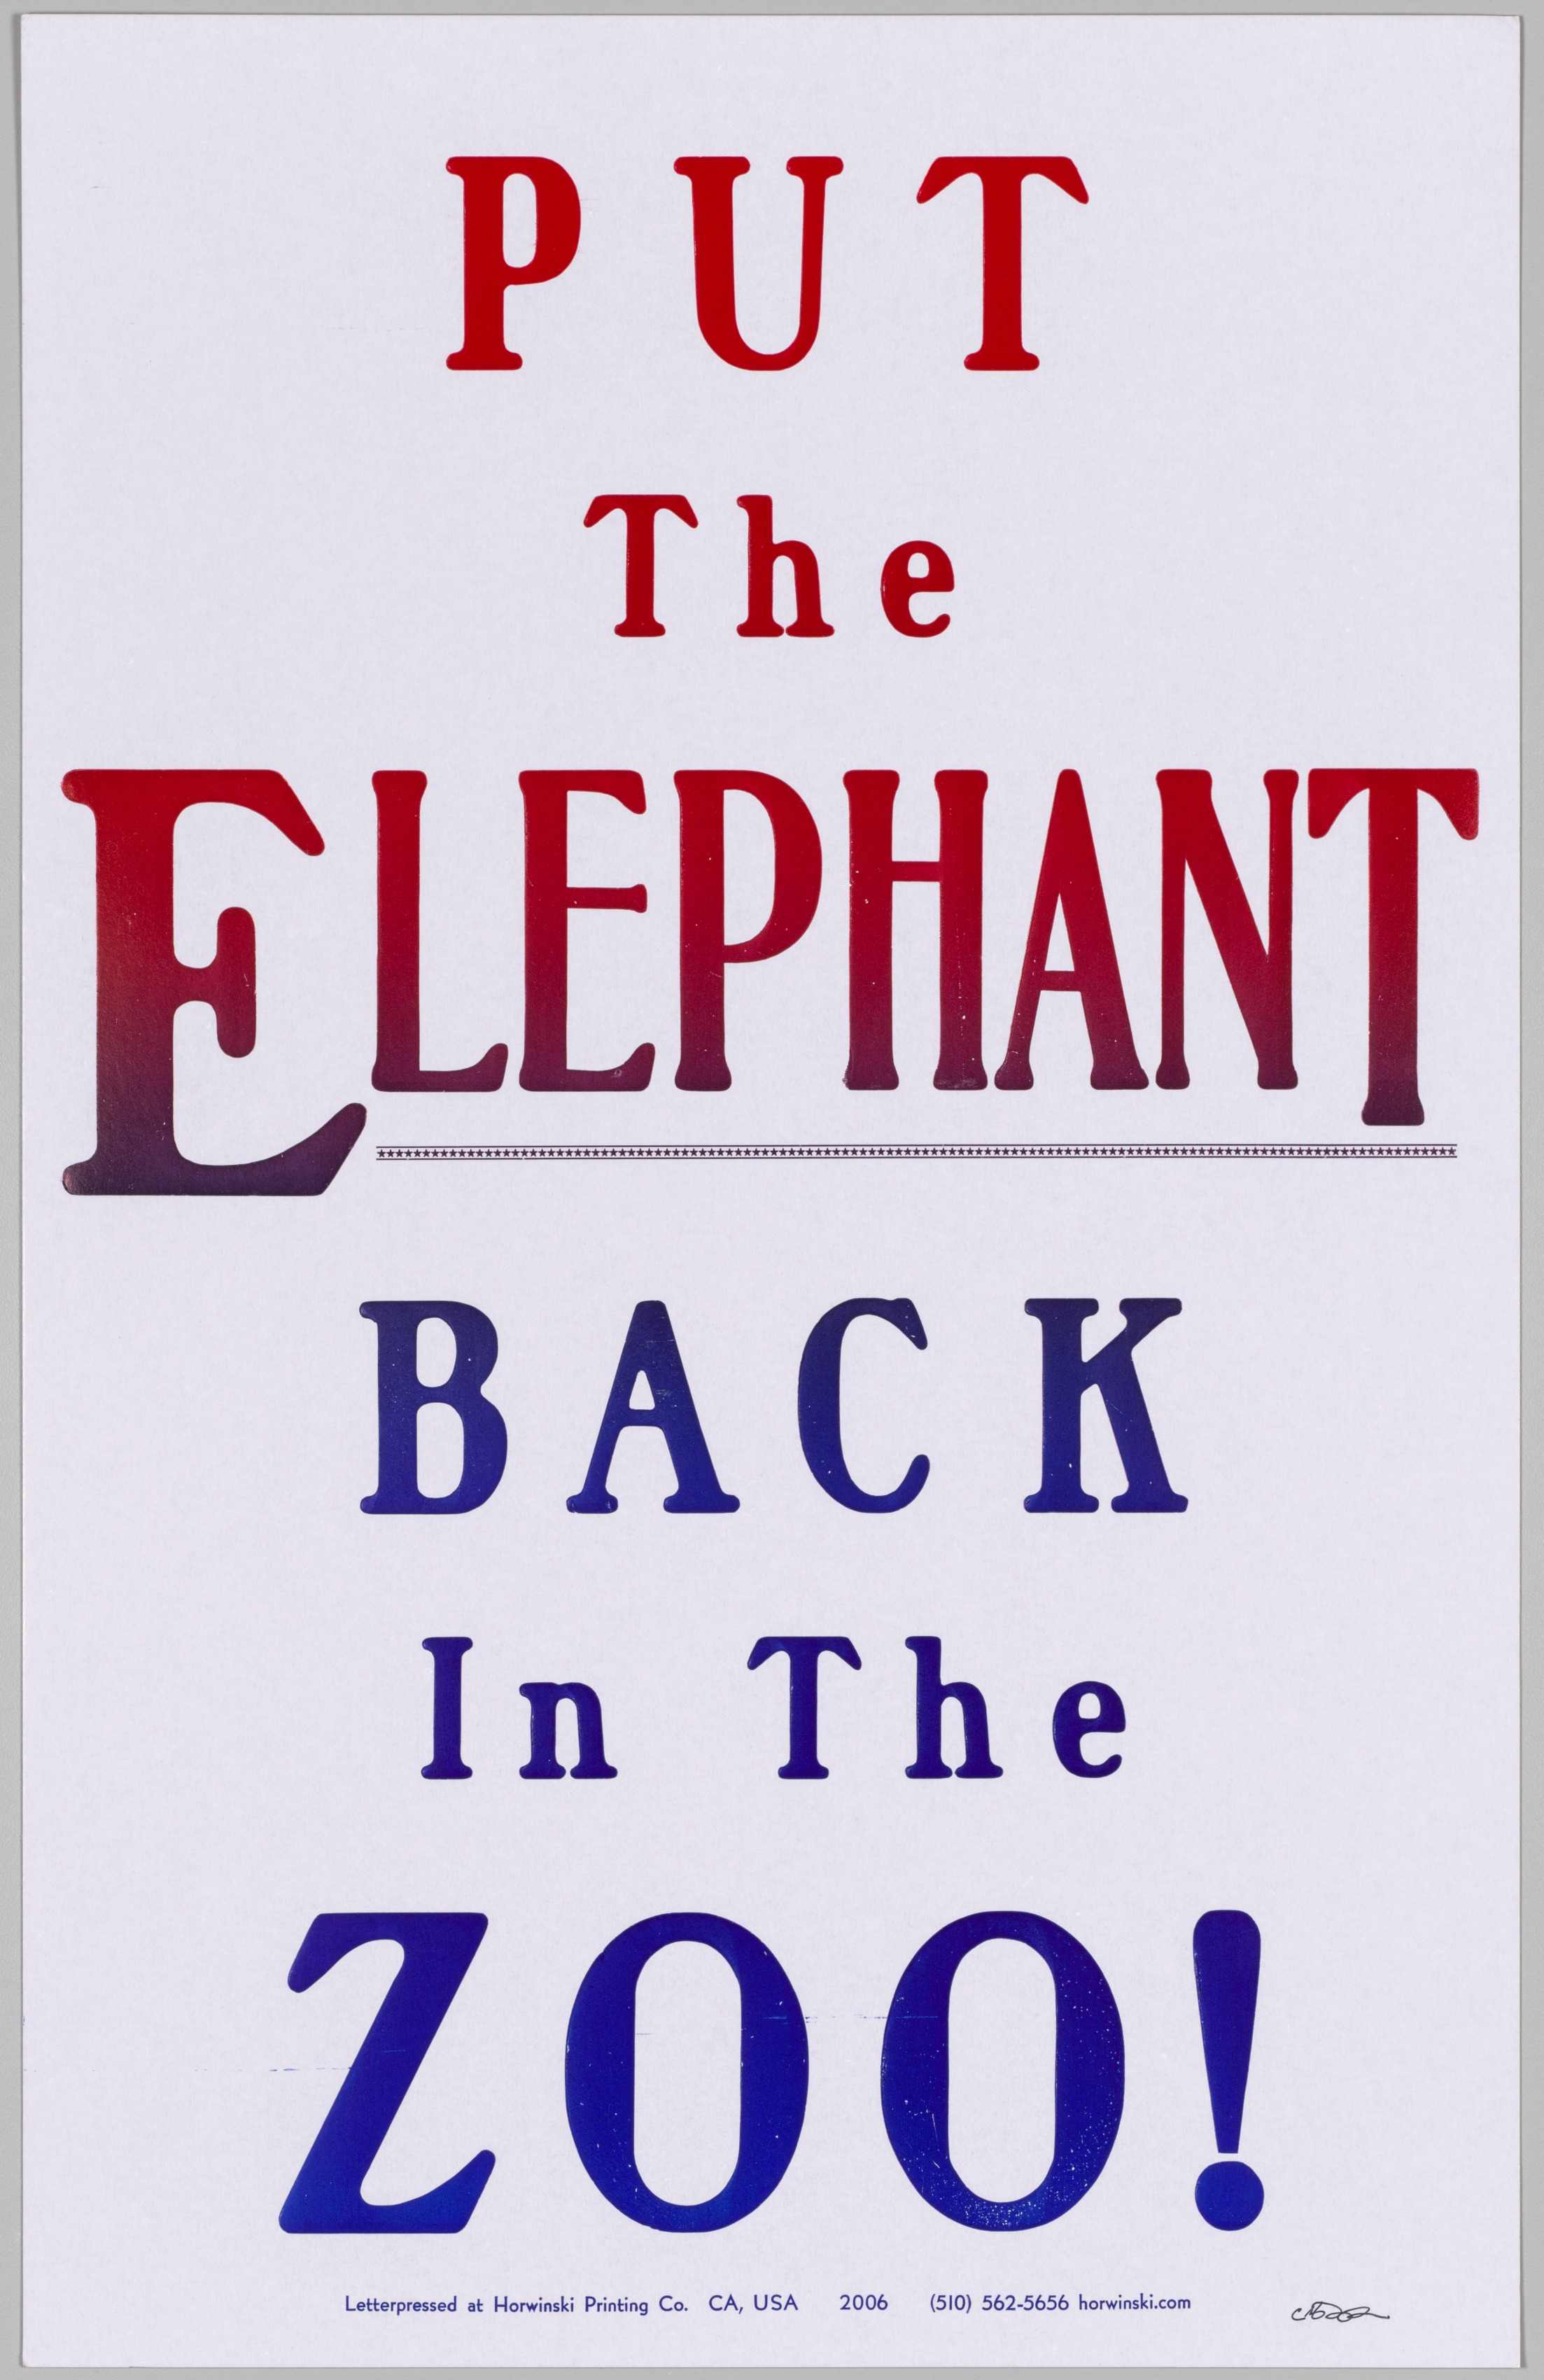 The Bad Air Smelled of Roses: Put the Elephant Back in the Zoo!